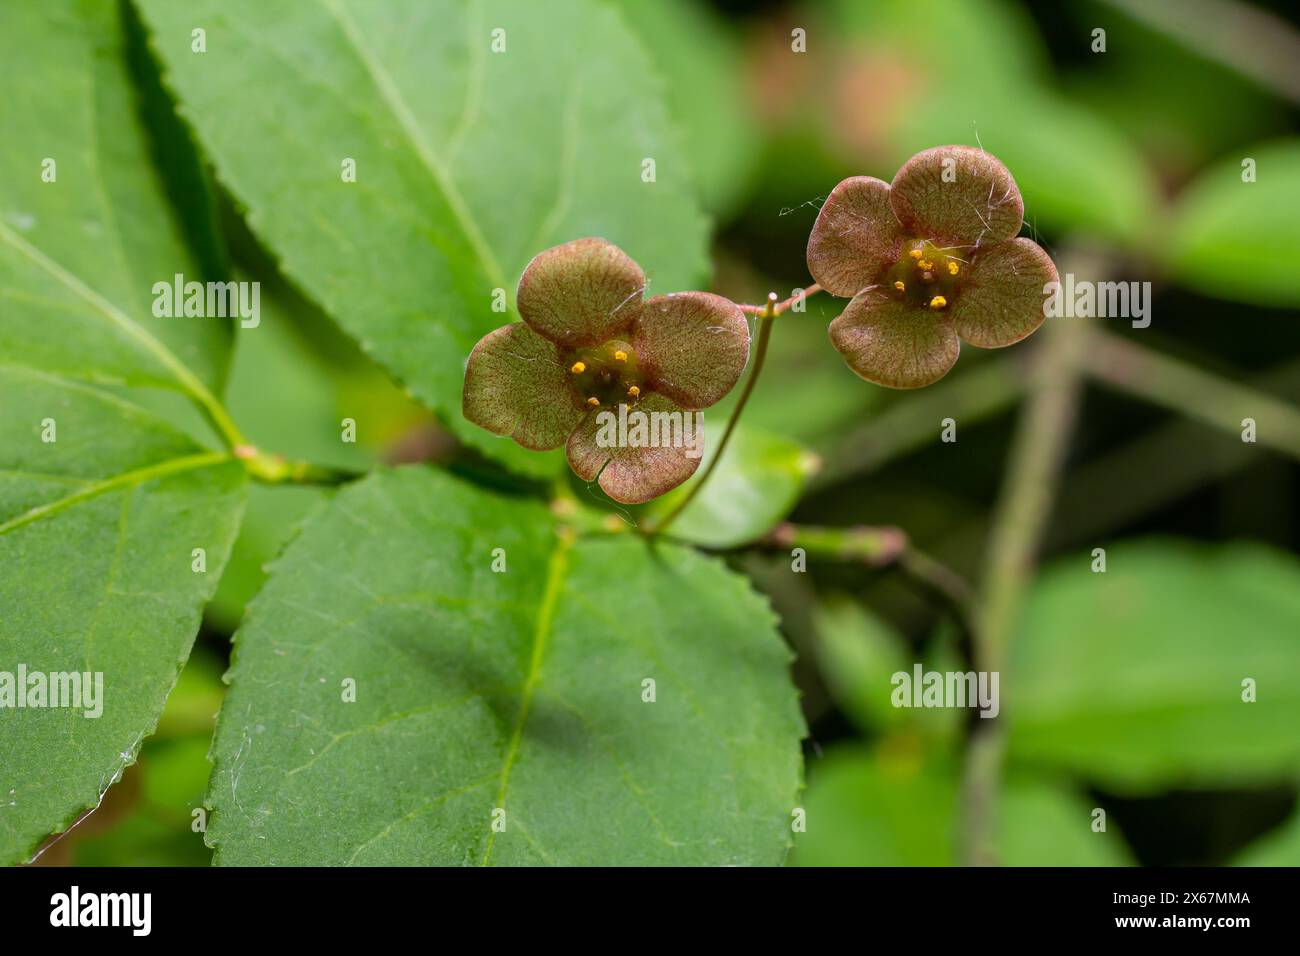 Little flowers of Euonymus verrucosus or spindle tree. Stock Photo